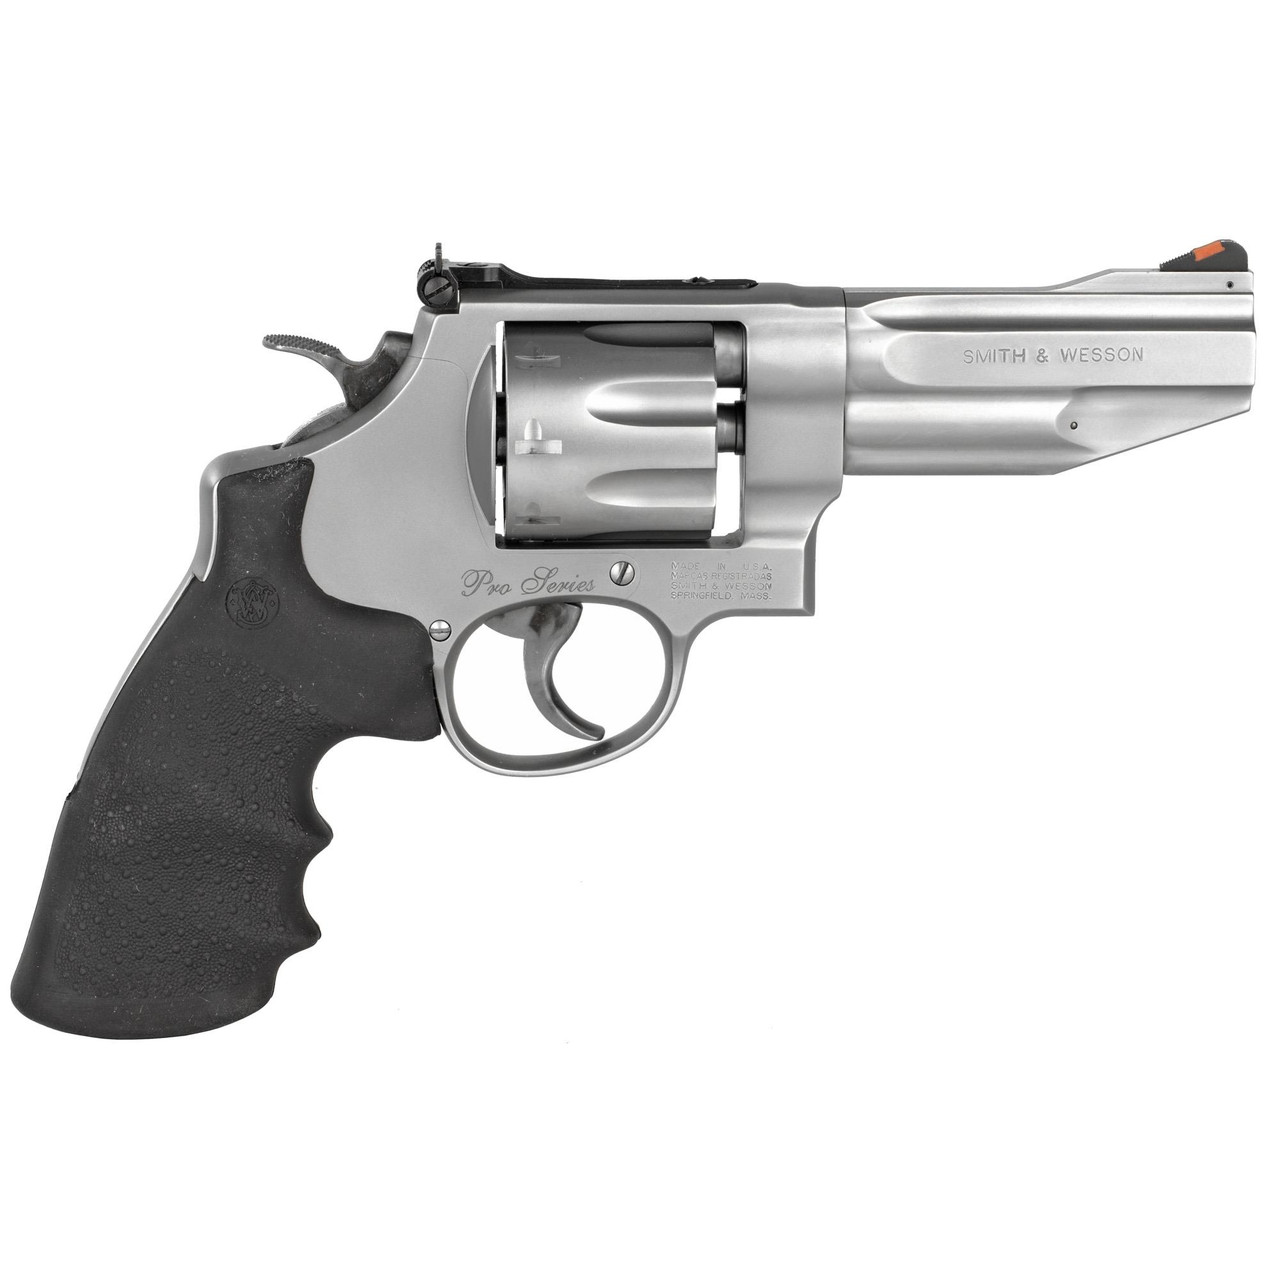 Smith & Wesson 62 Pro Series 178014